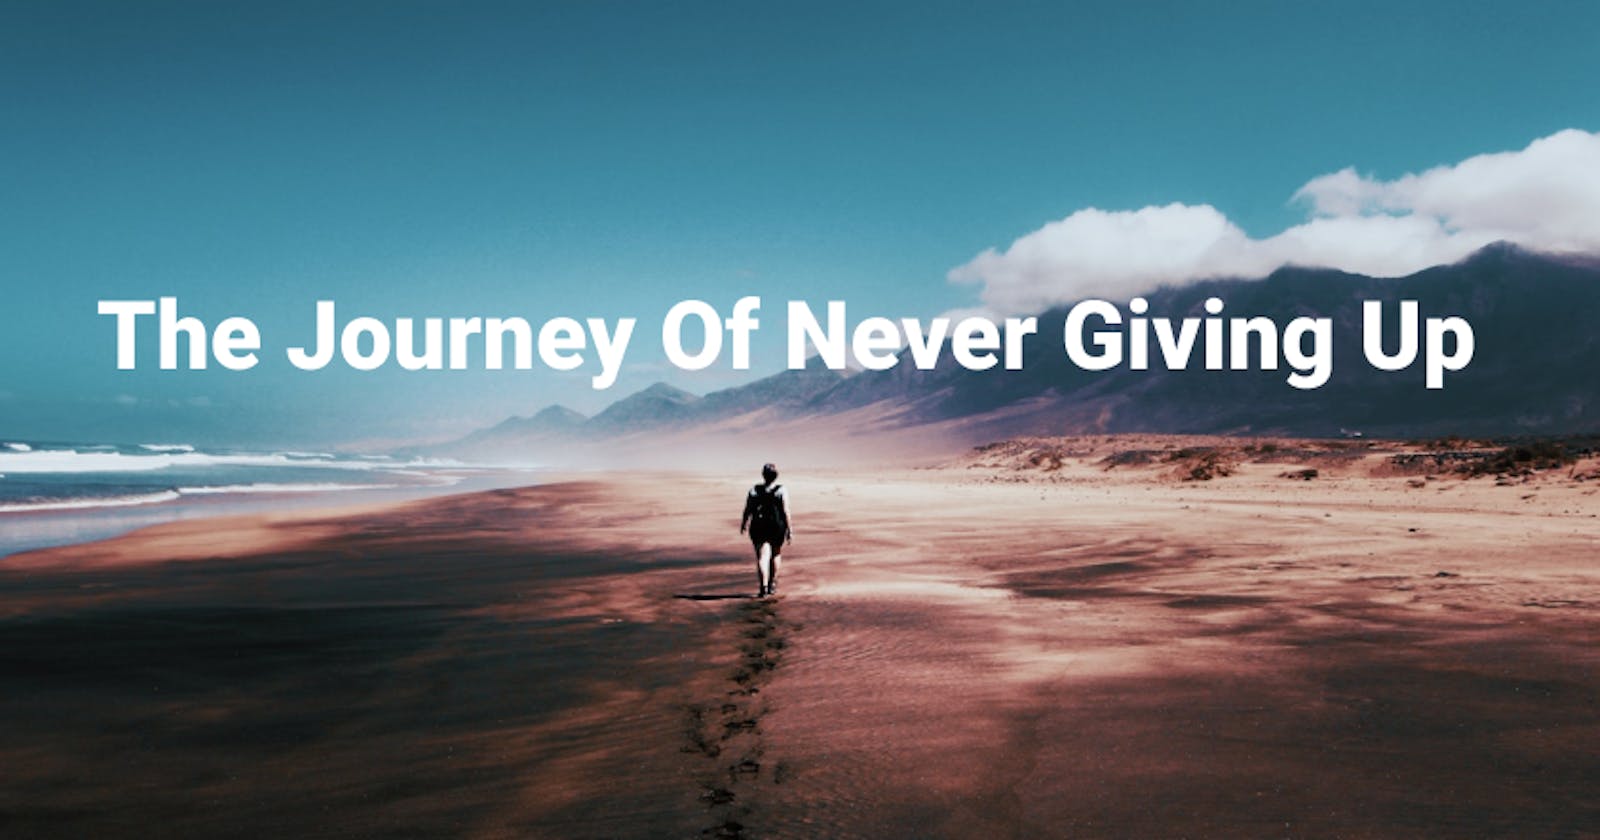 The Journey Of Never Giving Up.